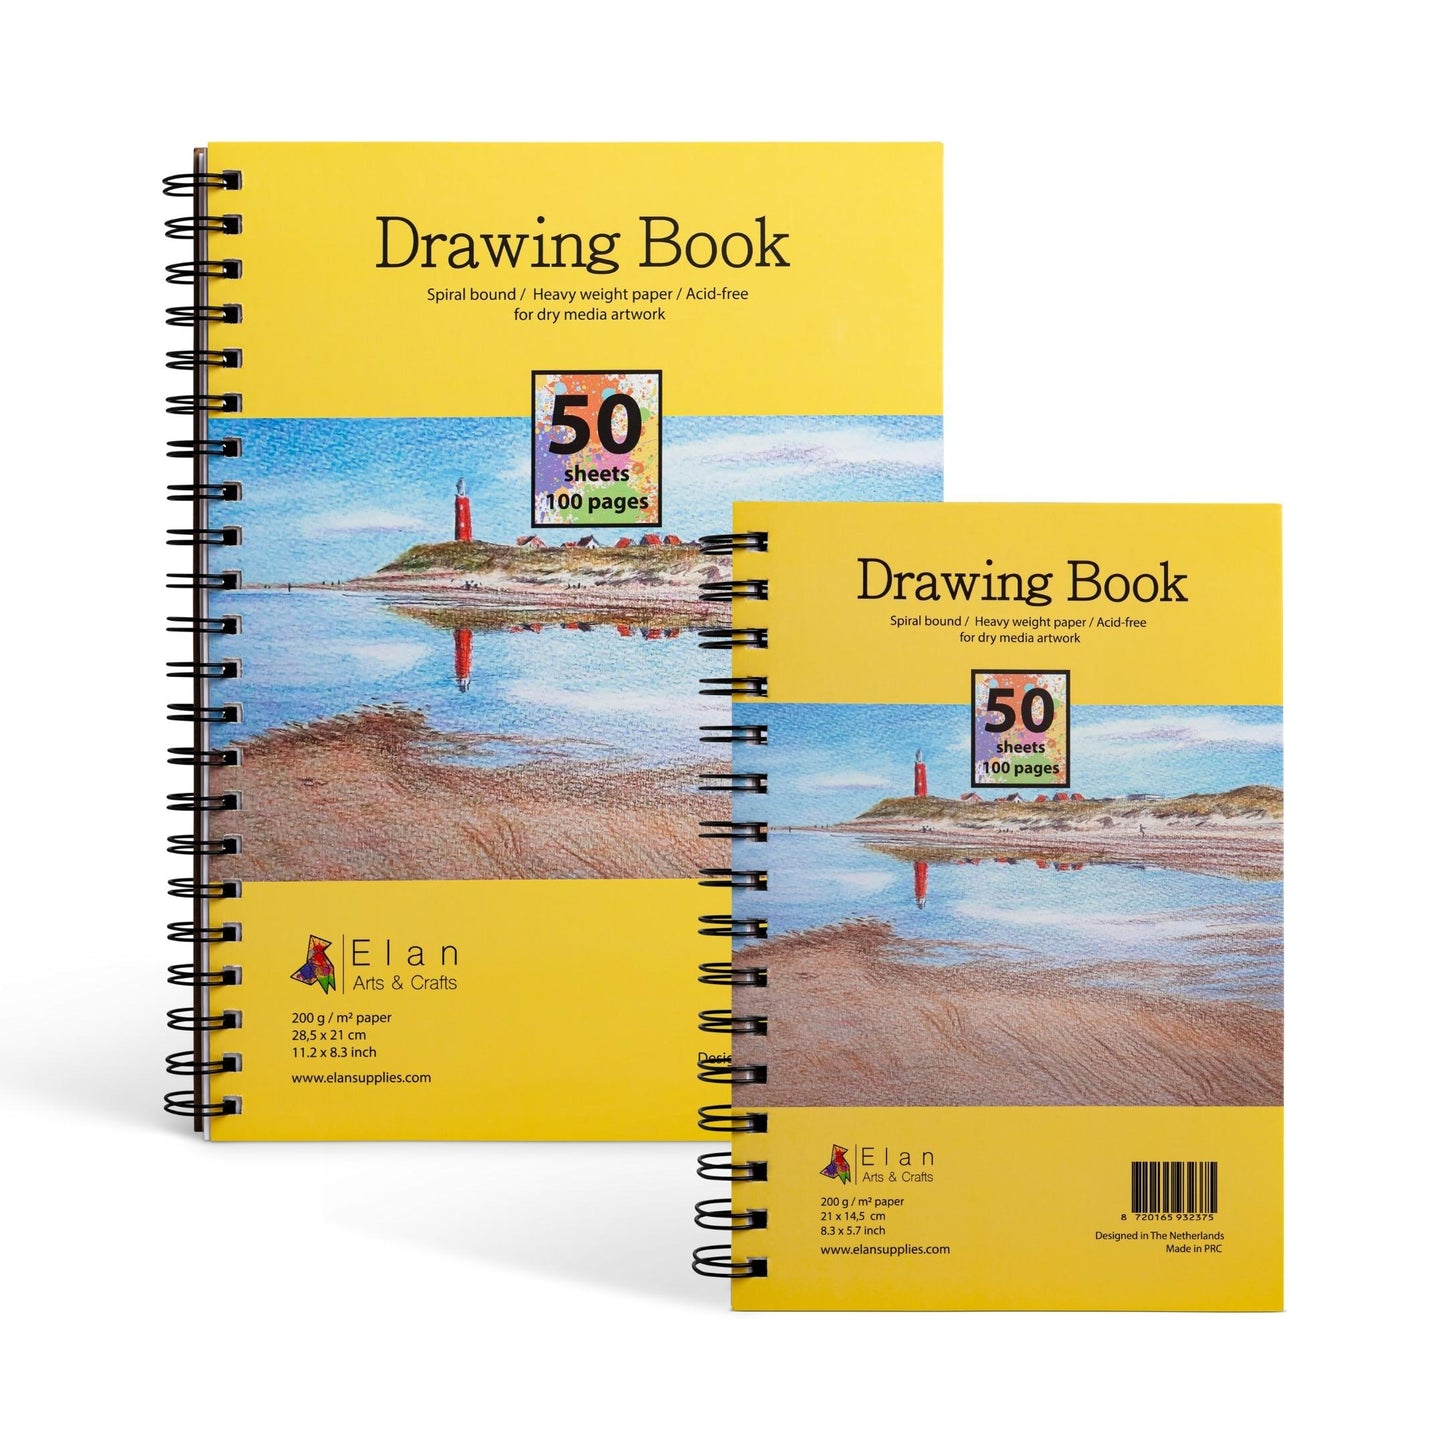 Drawing books